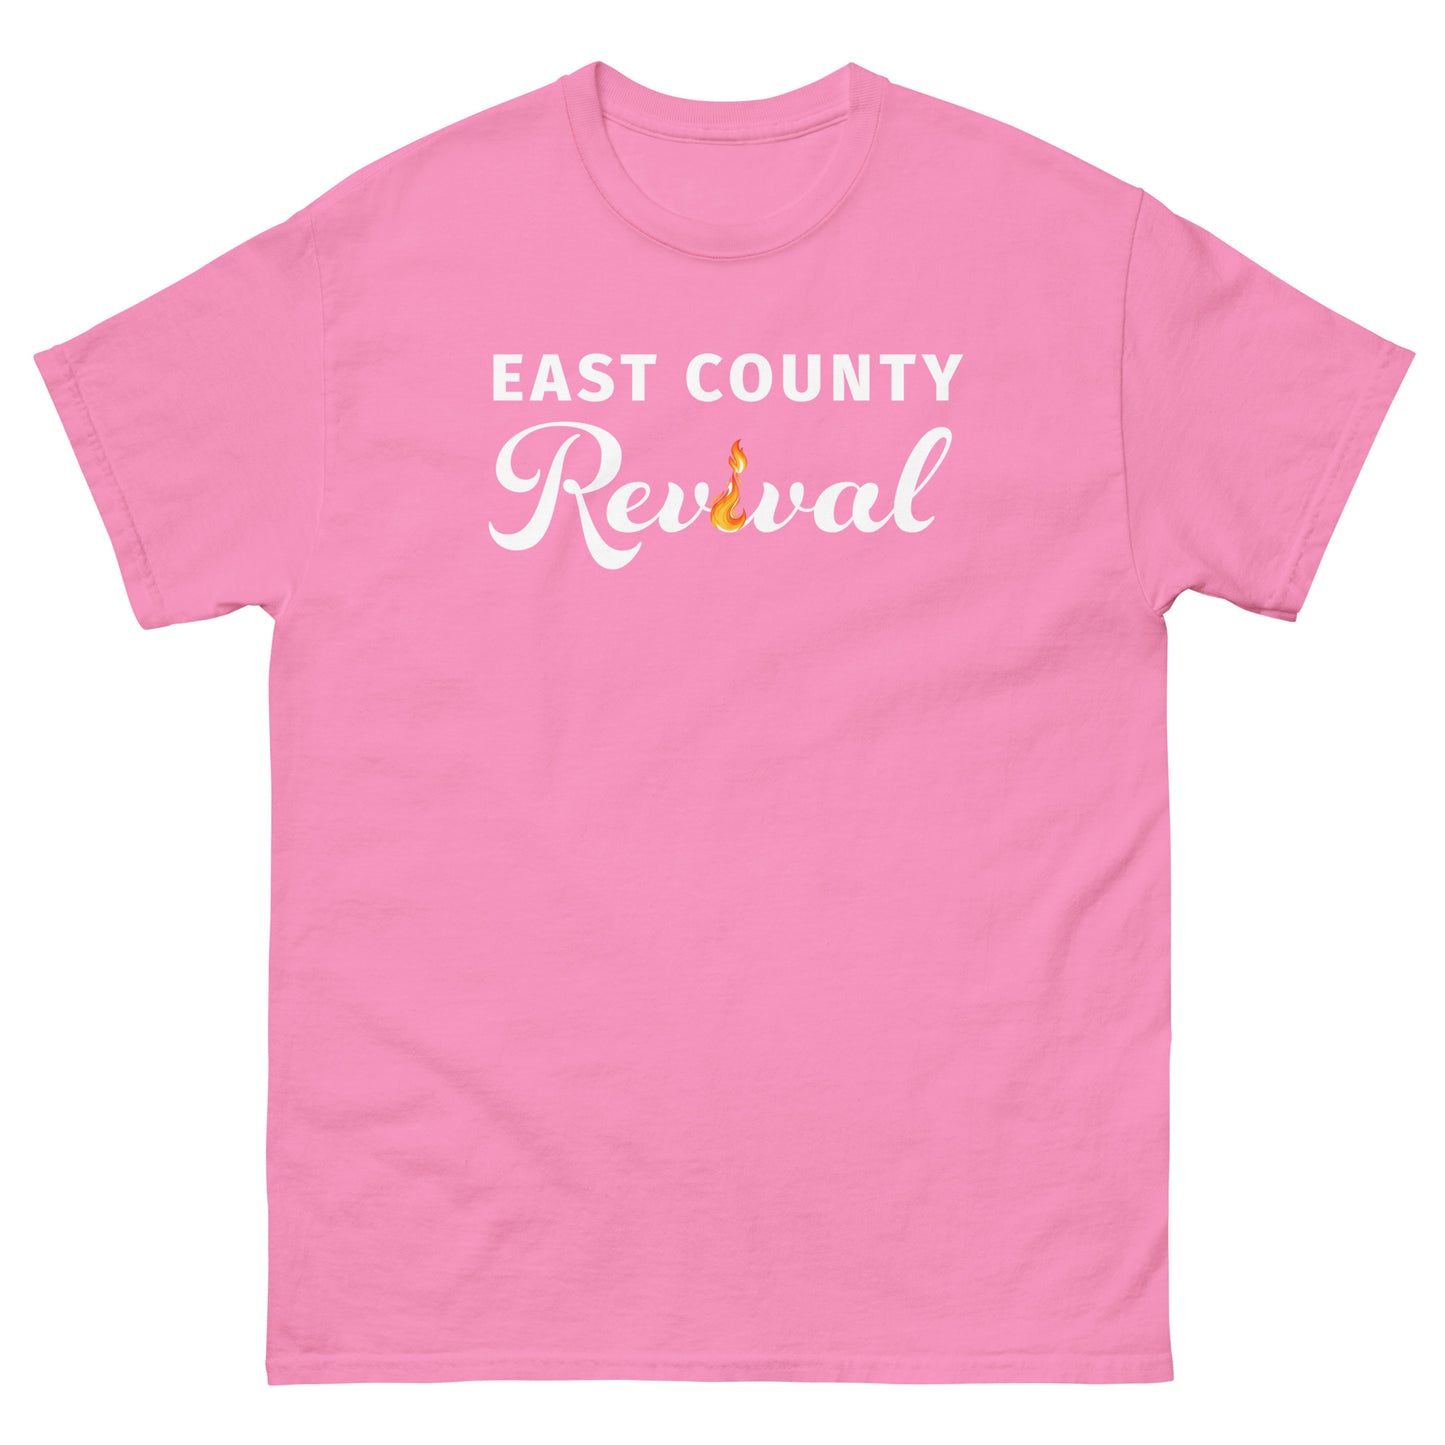 East County Revival Classic Tee